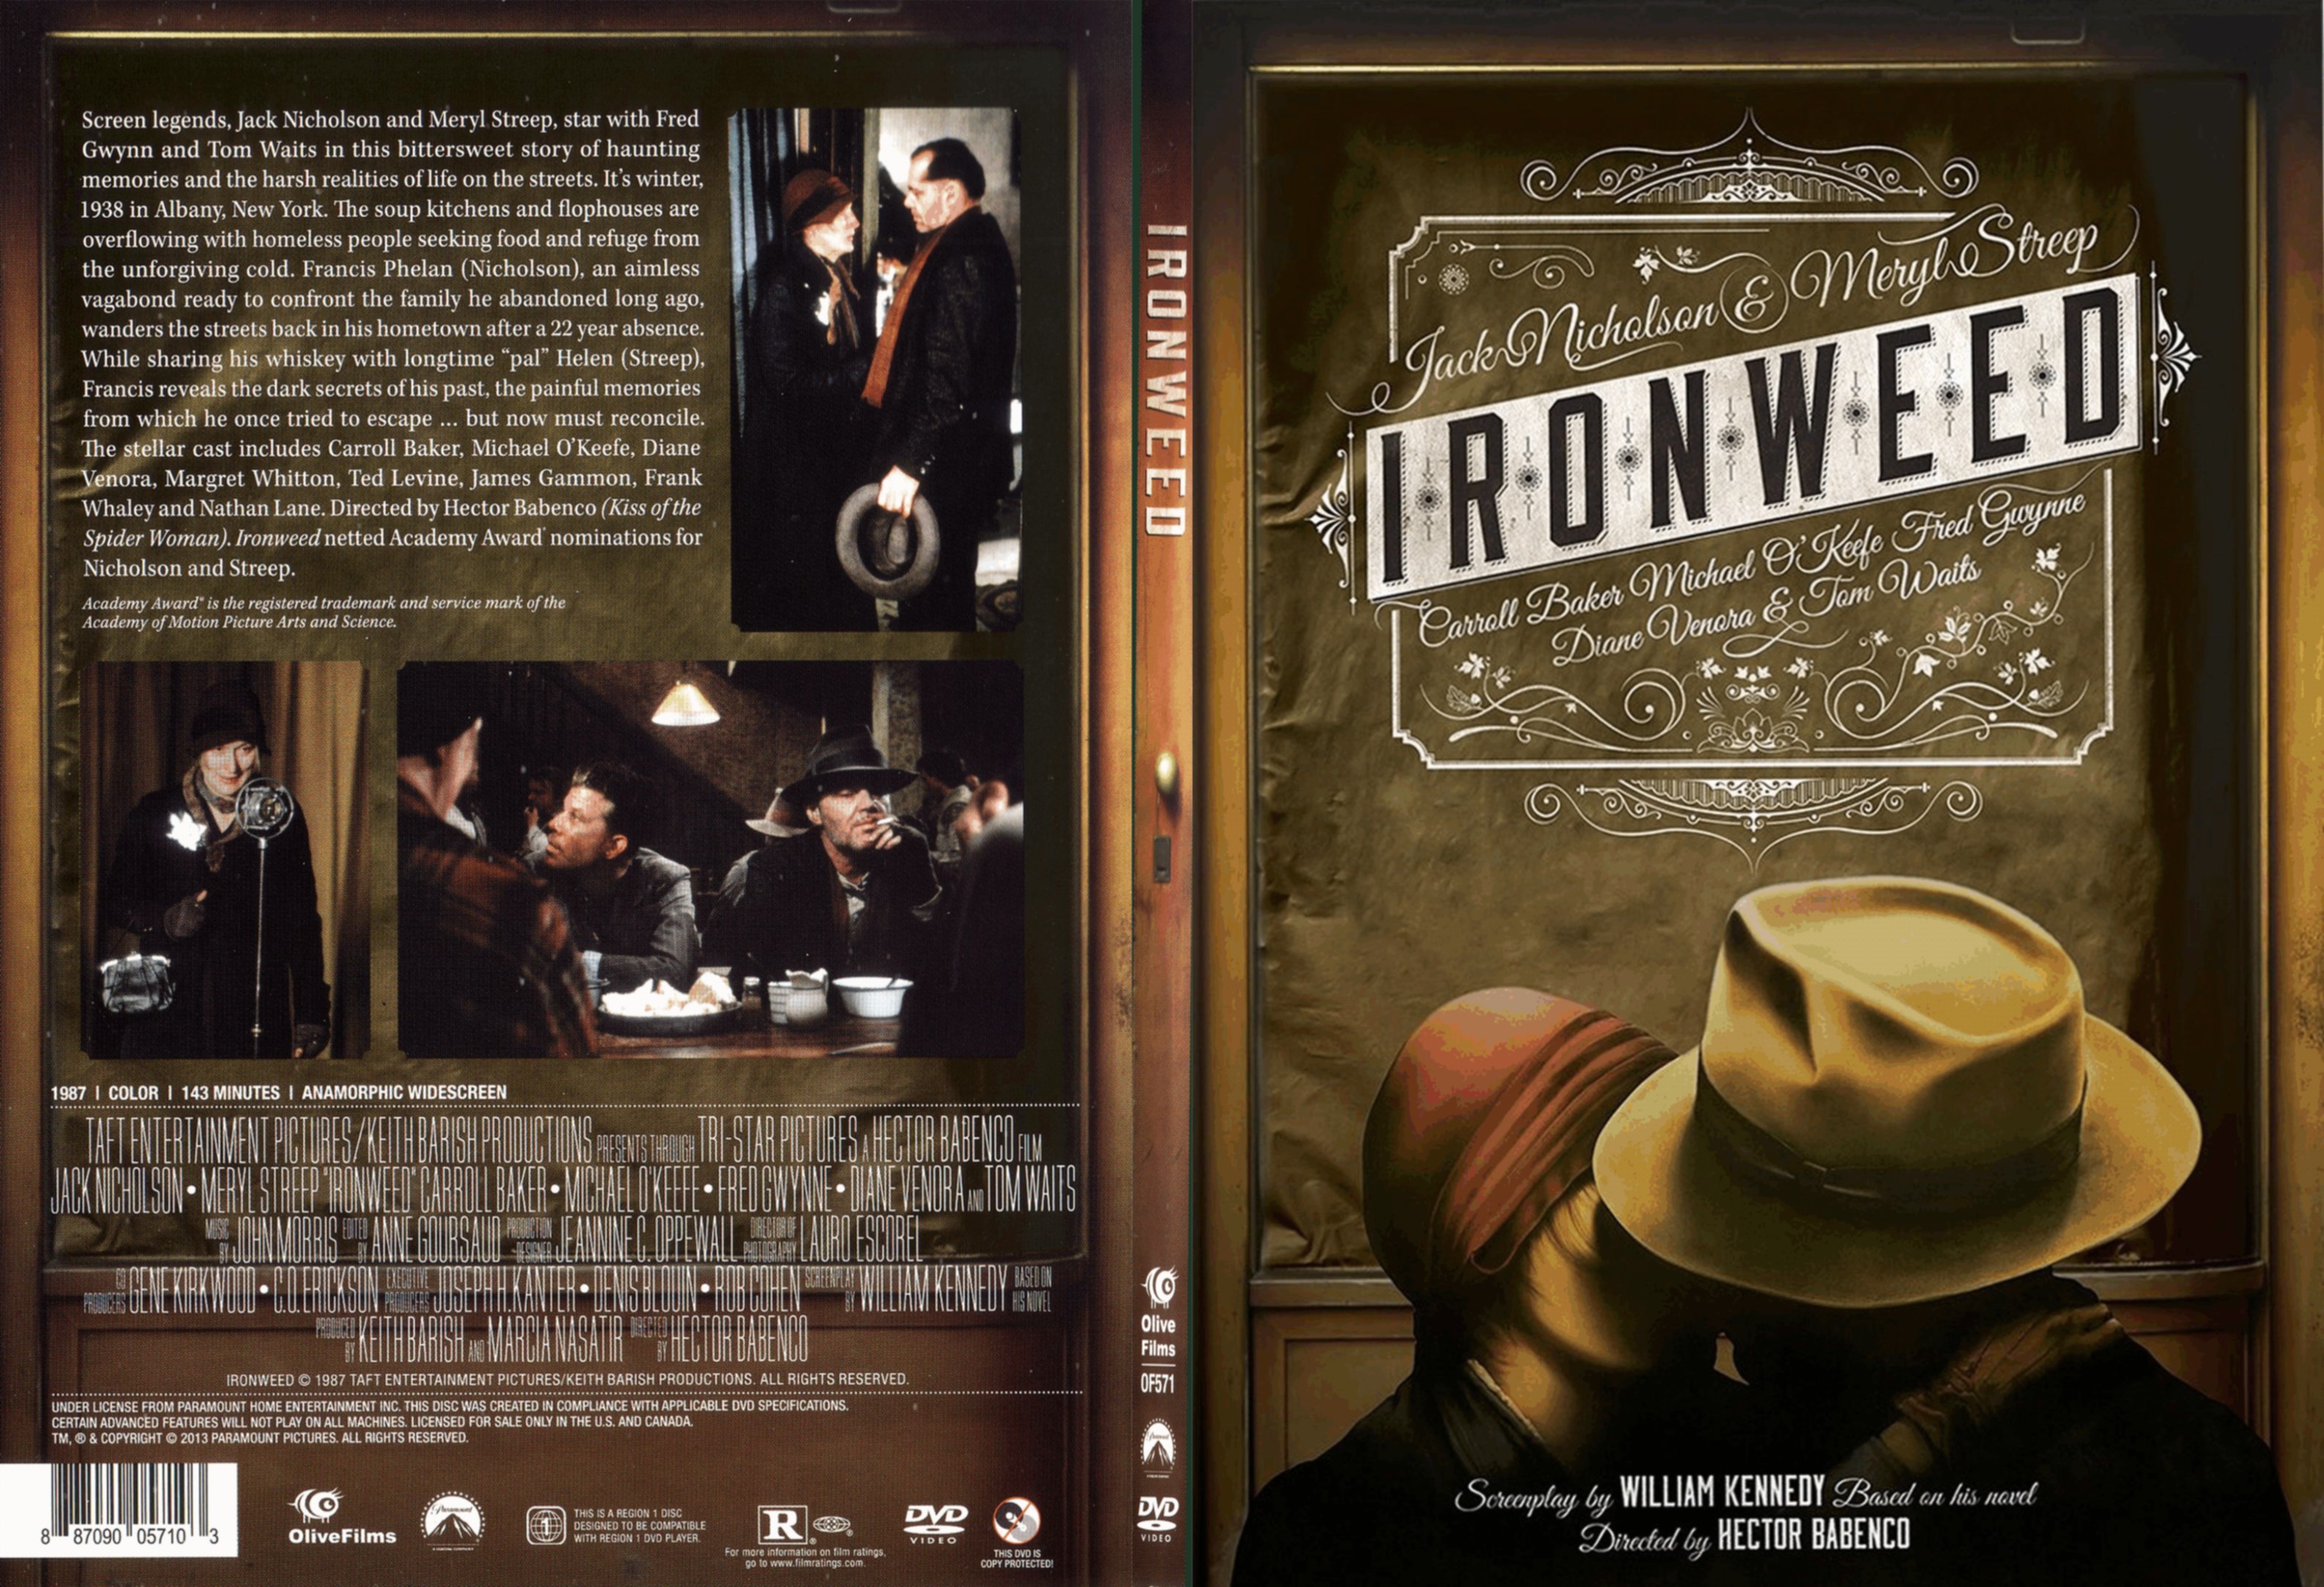 Jaquette DVD Ironweed - SLIM